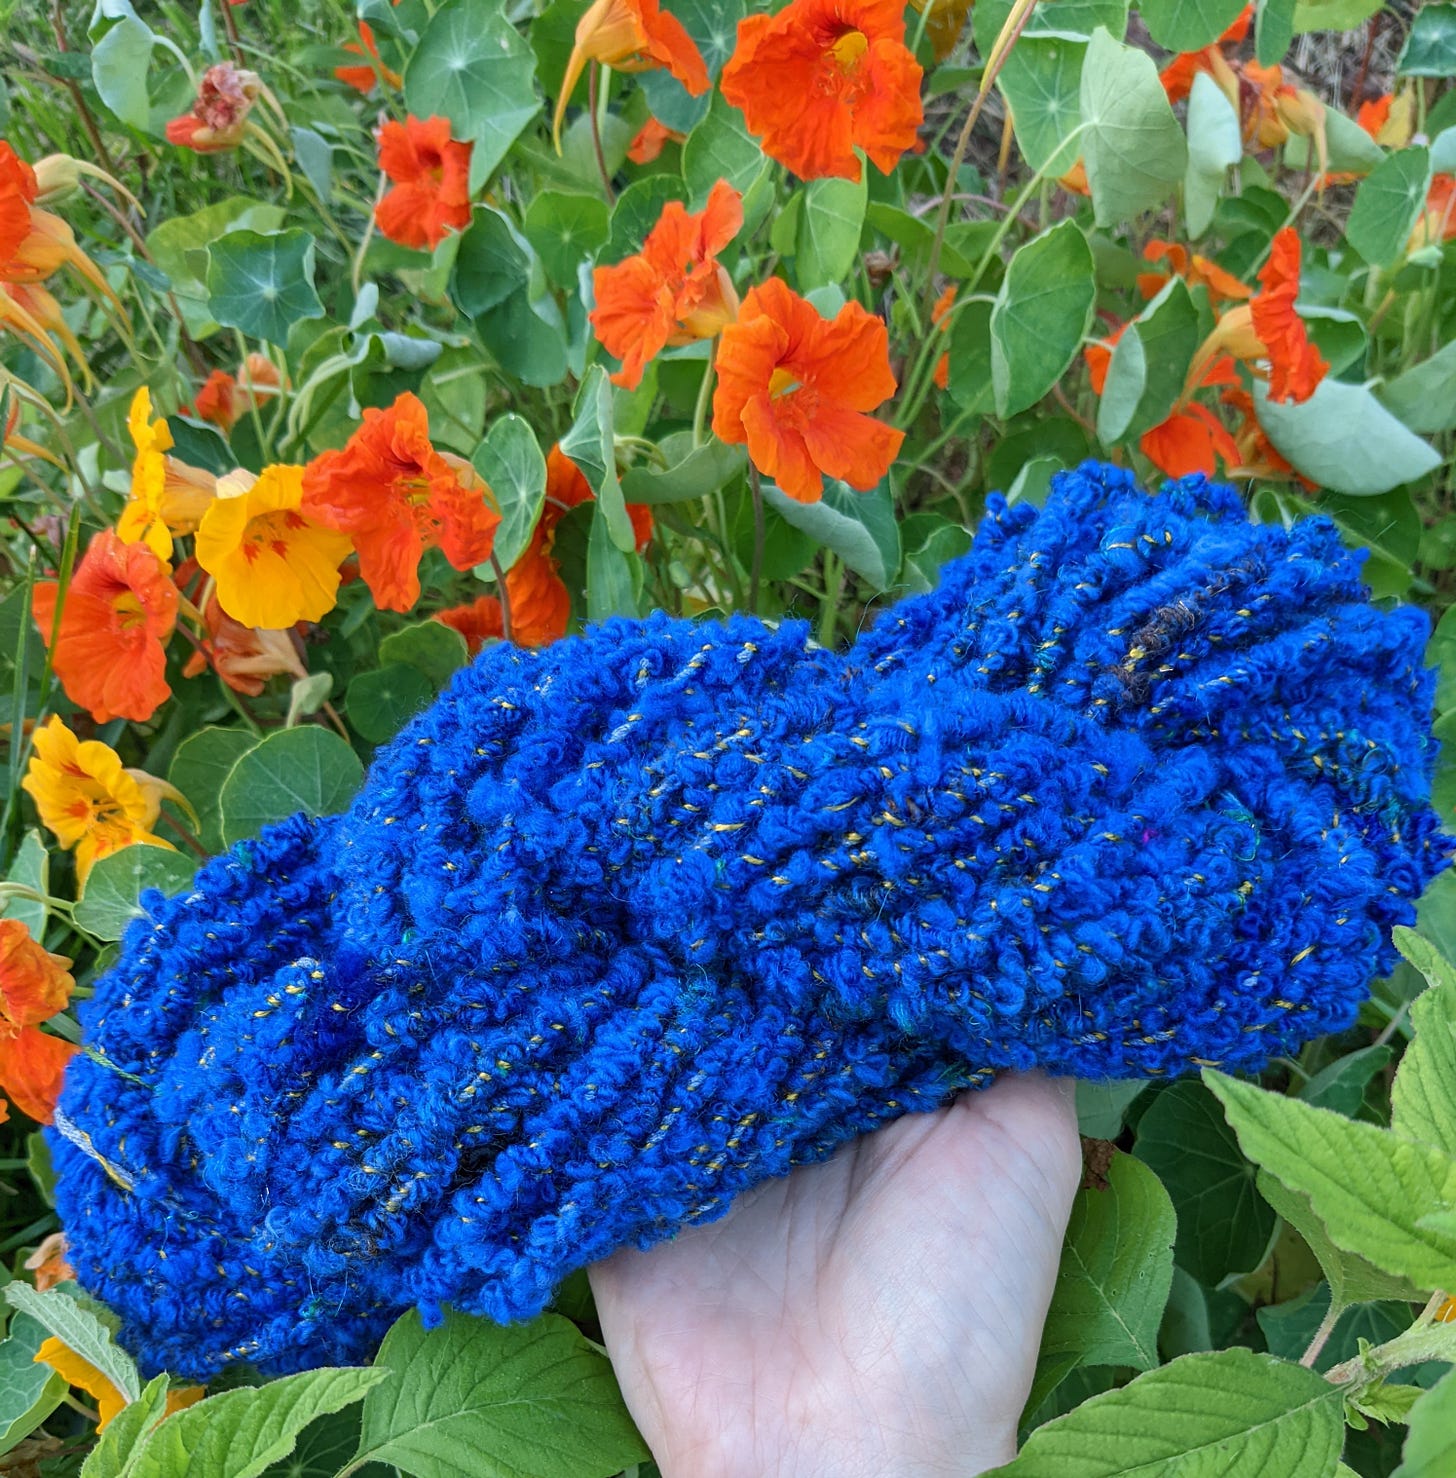 A skein of blue boucle yarn photographed in a bed of orange and yellow nasturtiums